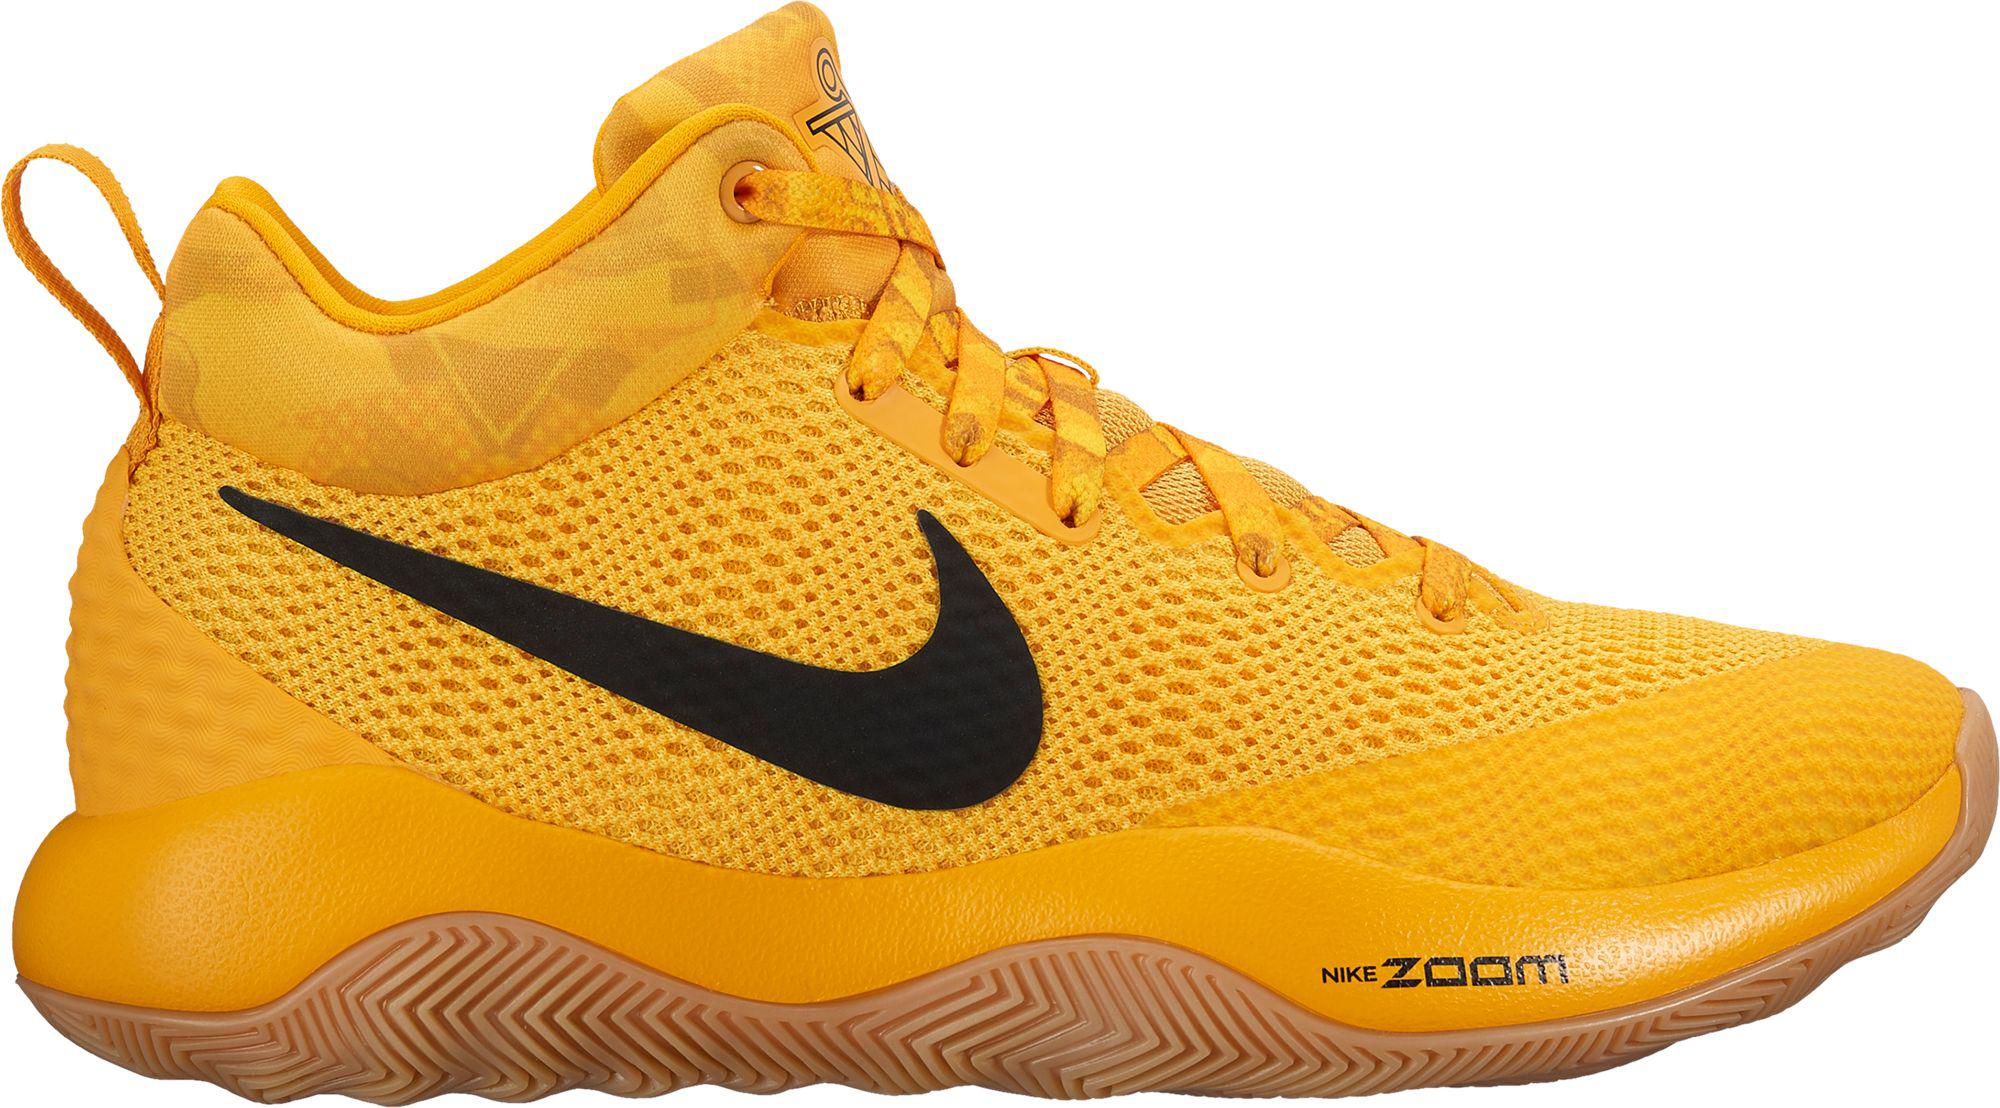 Nike Zoom Rev 2017 Basketball Shoes in Yellow for Men - Lyst